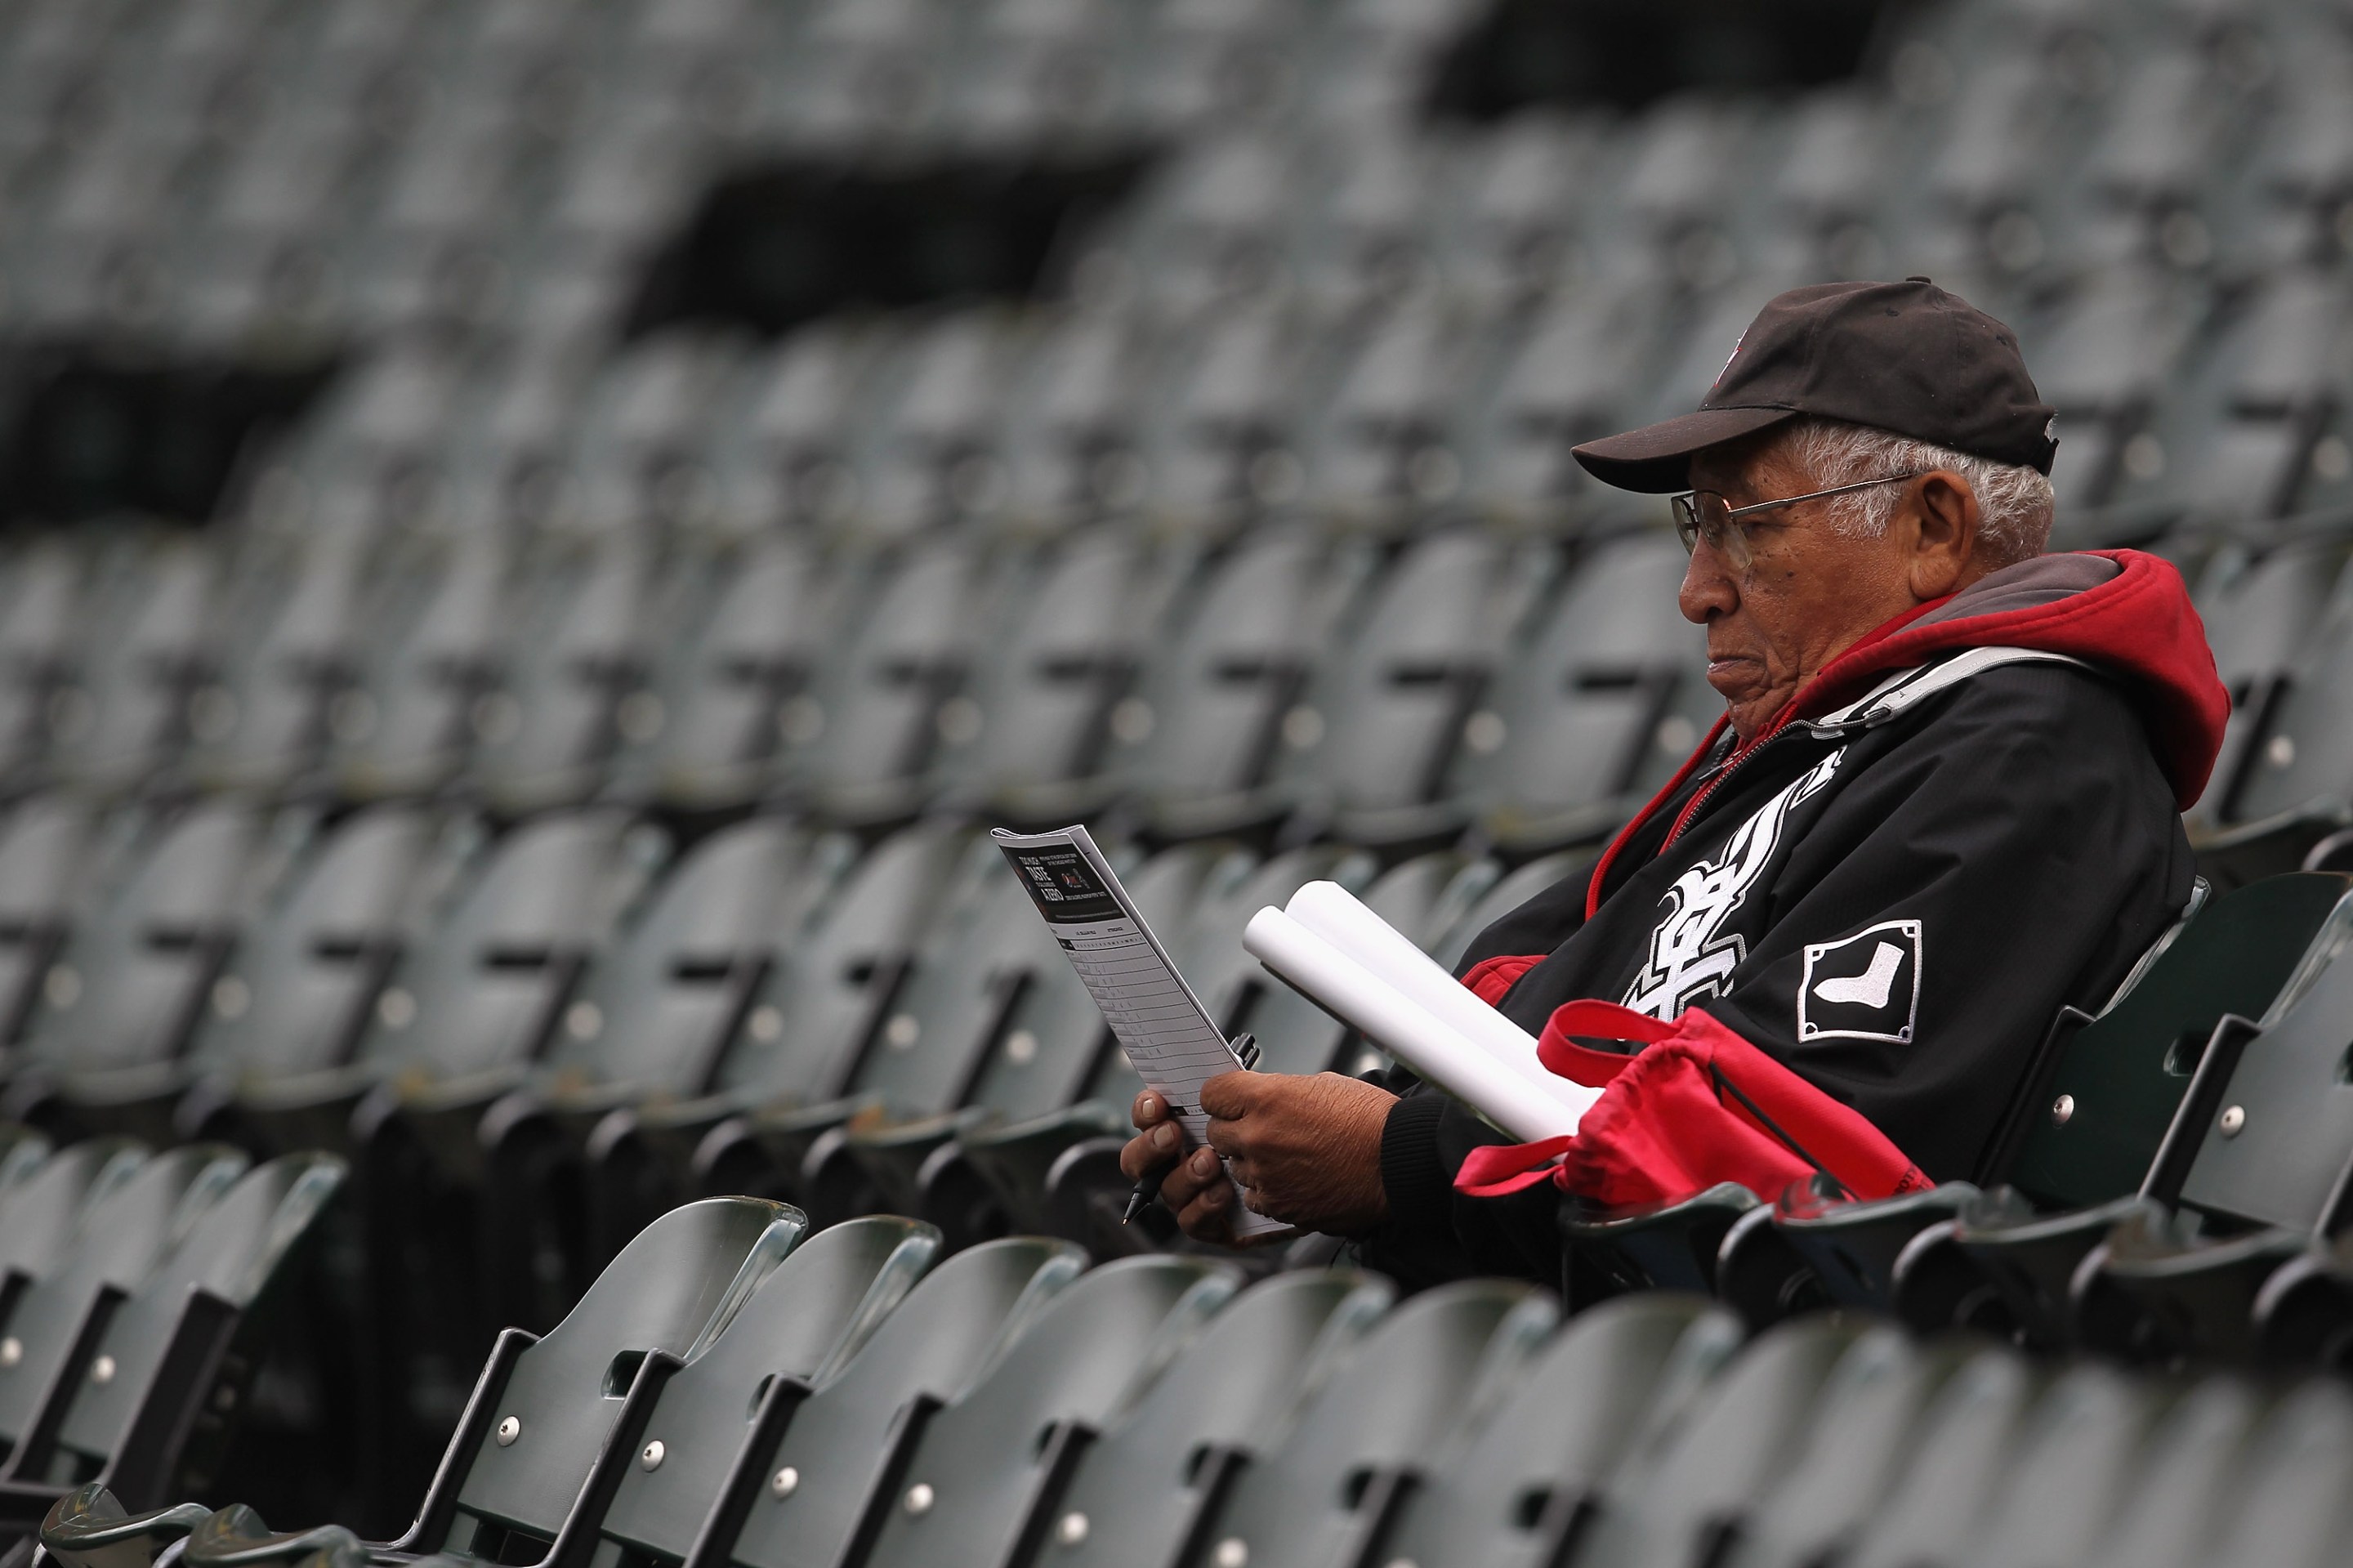 CHICAGO, IL - SEPTEMBER 28: A fan of the Chicago White Sox looks over his scorecard in the outfield during the last game of the season against the Toronto Blue Jays at U.S. Cellular Field on September 28, 2011 in Chicago, Illinois. The Blue Jays defeated the White Sox 3-2.